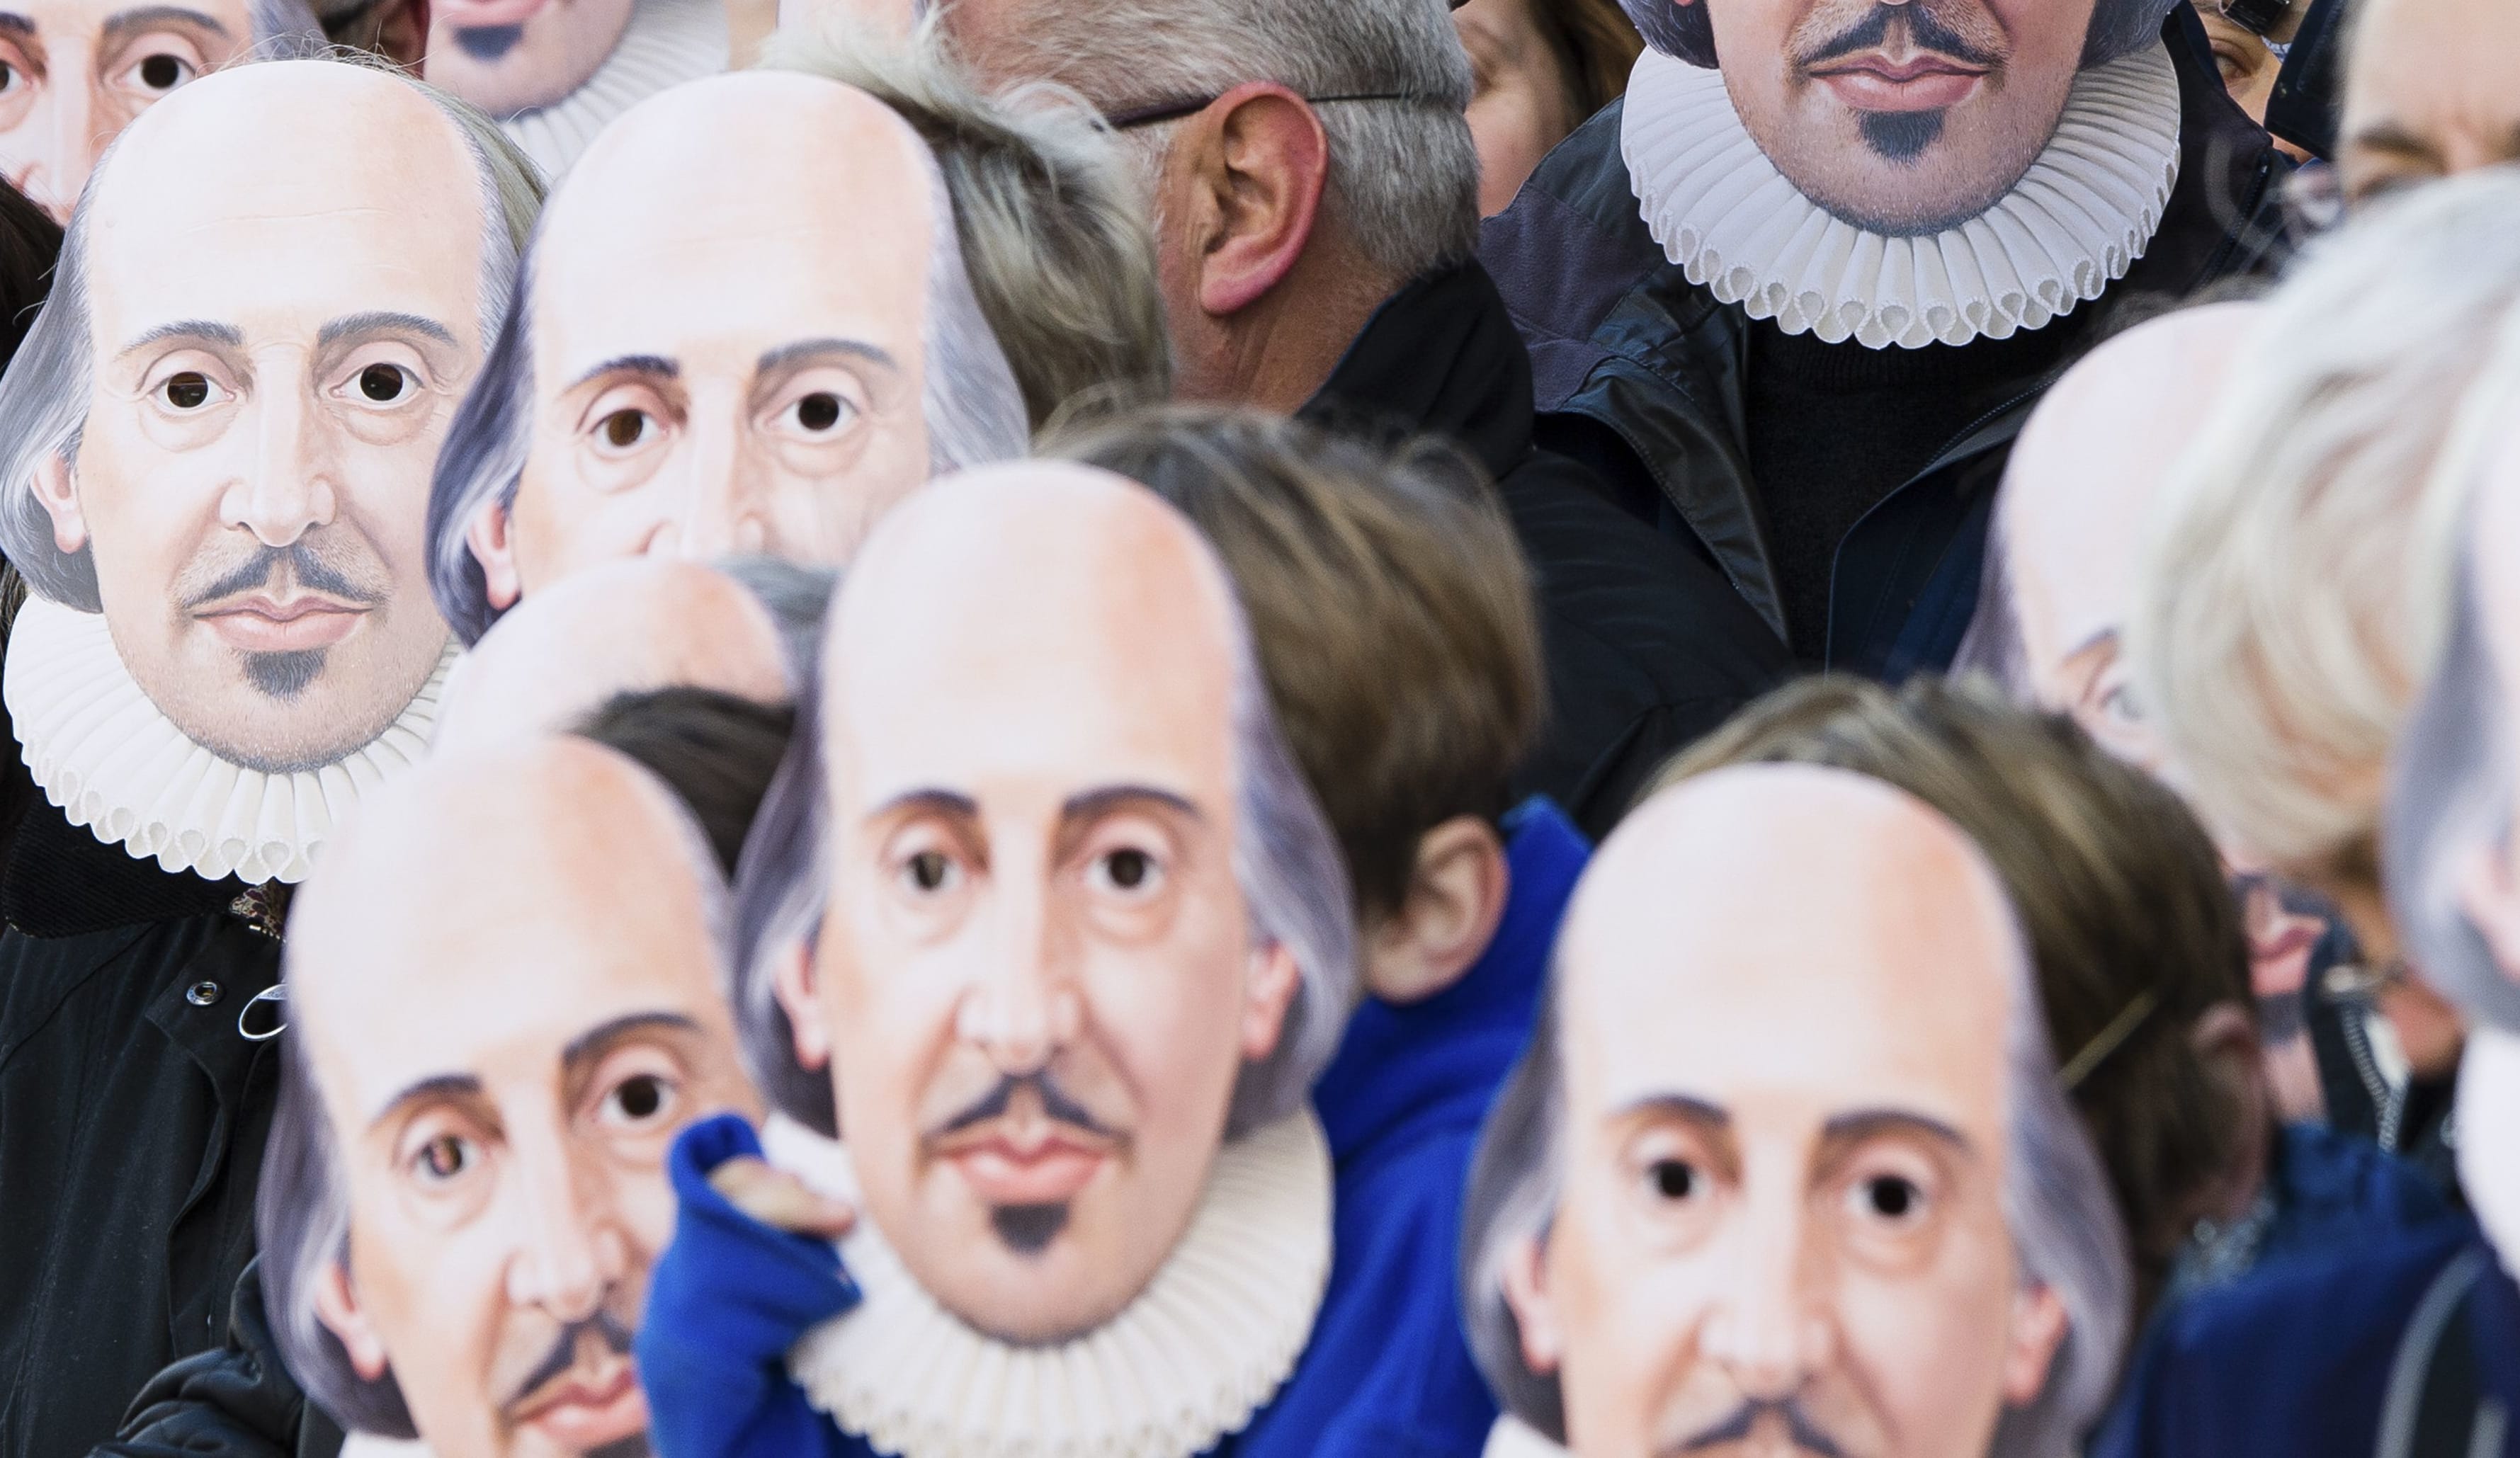 People wearing William Shakespeare masks line the street in Stratford-upon-Avon during a parade to mark 400 years since the bard's death.